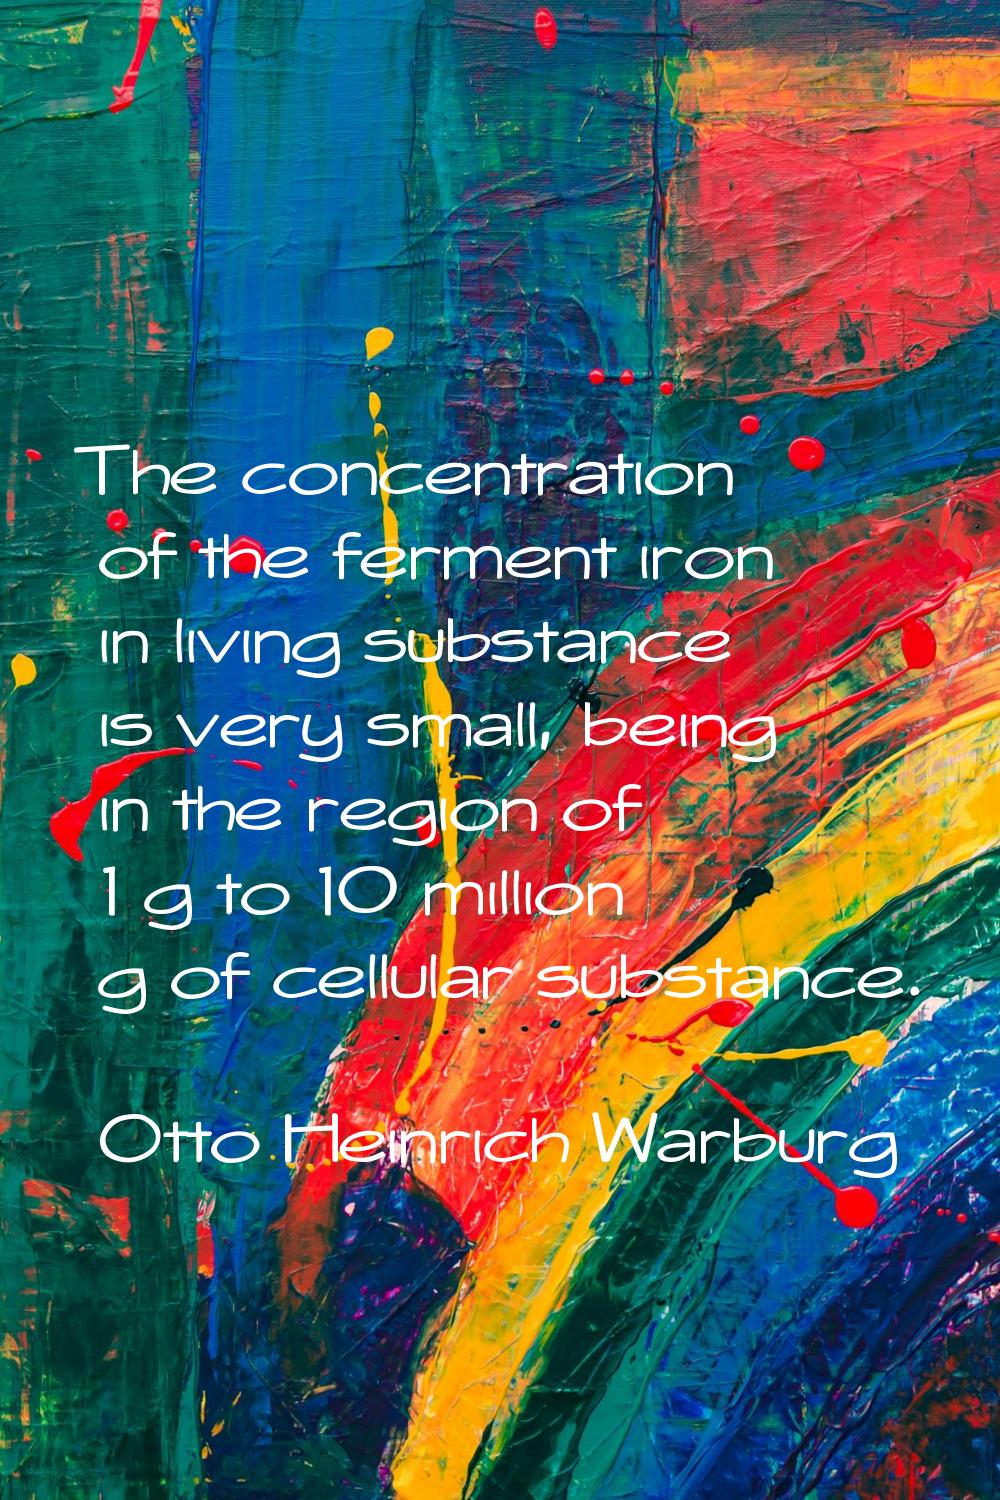 The concentration of the ferment iron in living substance is very small, being in the region of 1 g